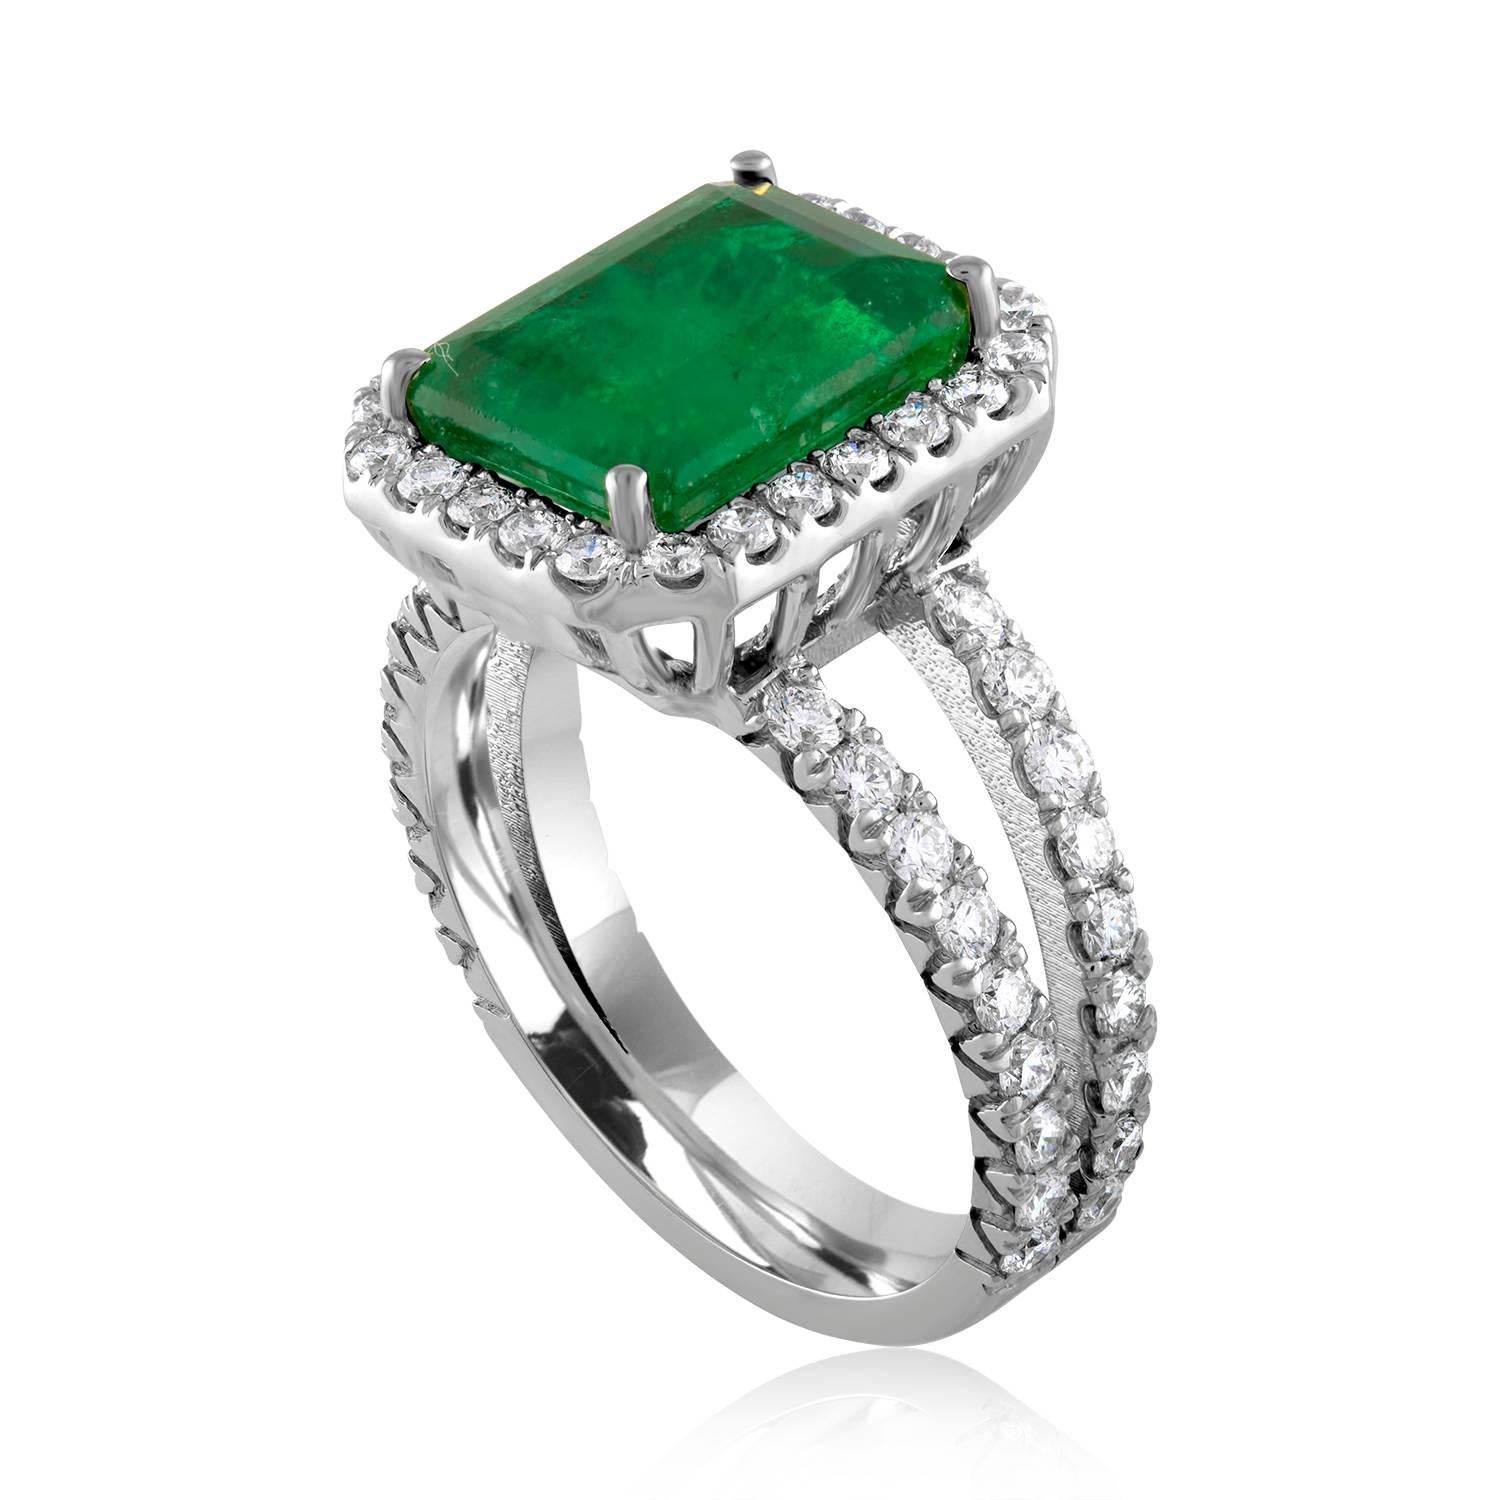 Beautiful Emerald Ring
The ring is 18K White Gold
The Emerald is 3.27 Carats Step Cut or Emerald Cut Oil Only
There are 1.10 Carats in Diamonds F/G VS
The ring is GIA Certified the Emerald Is Zambian
The ring is a size 6, sizable.
The ring weighs